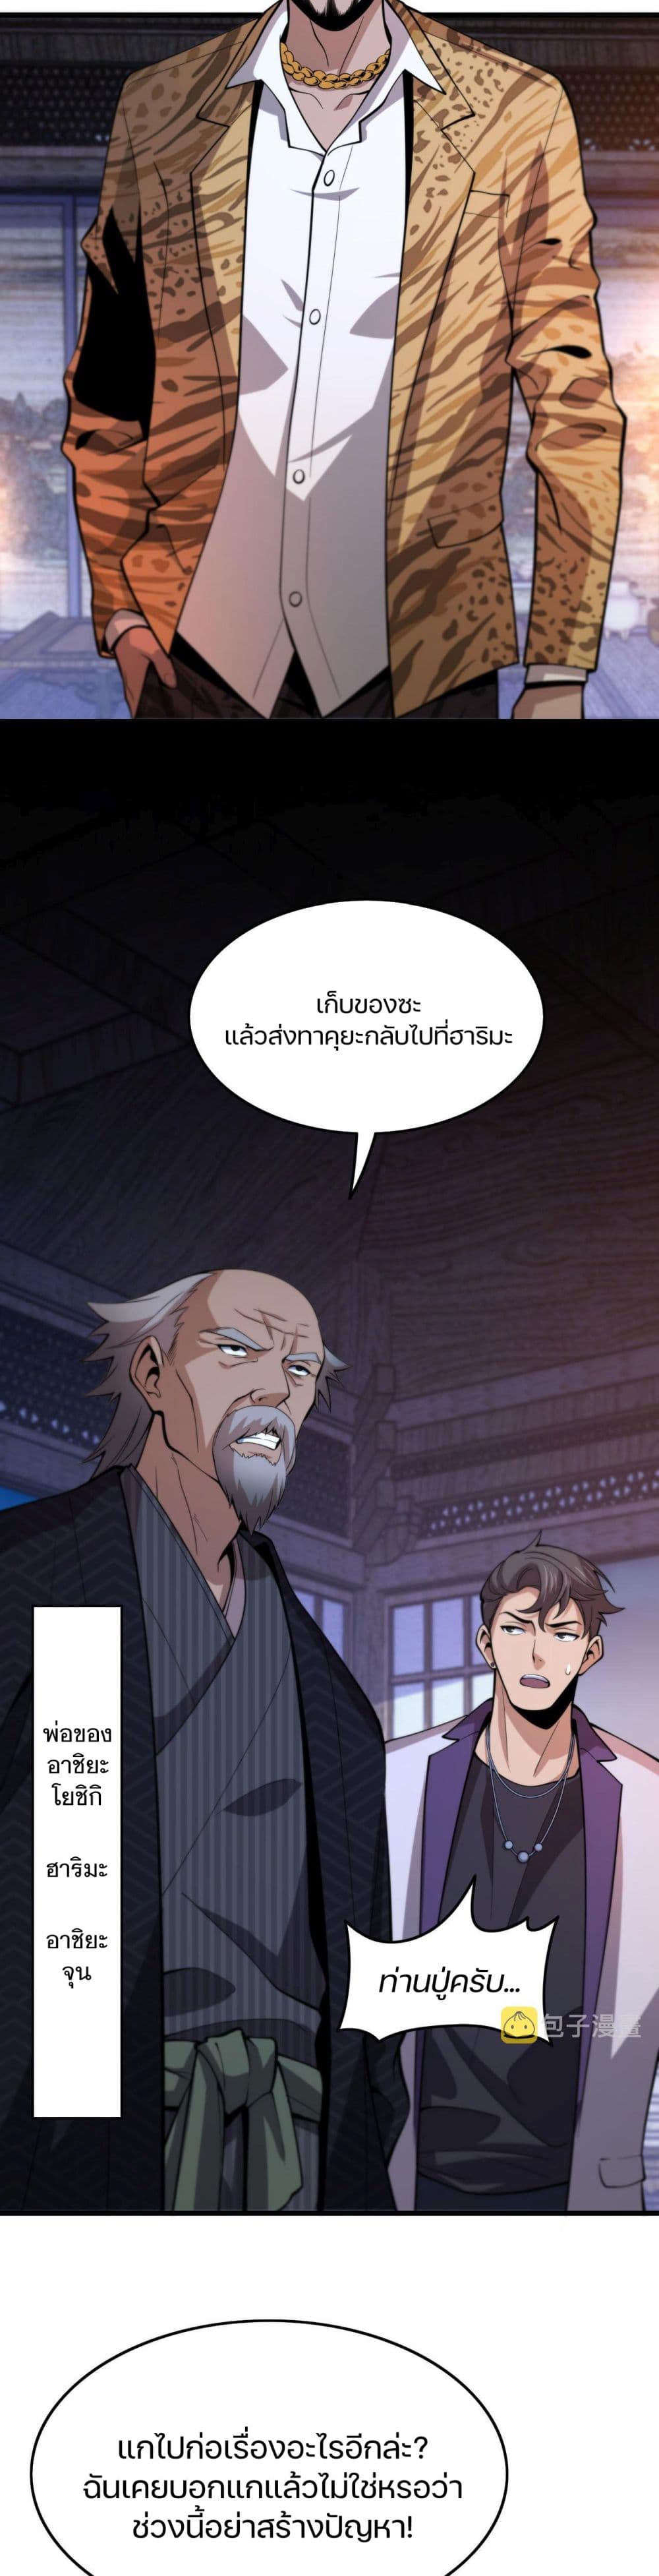 The Grand Master came down from the Mountain 49-ตระกูลฮาริมะ